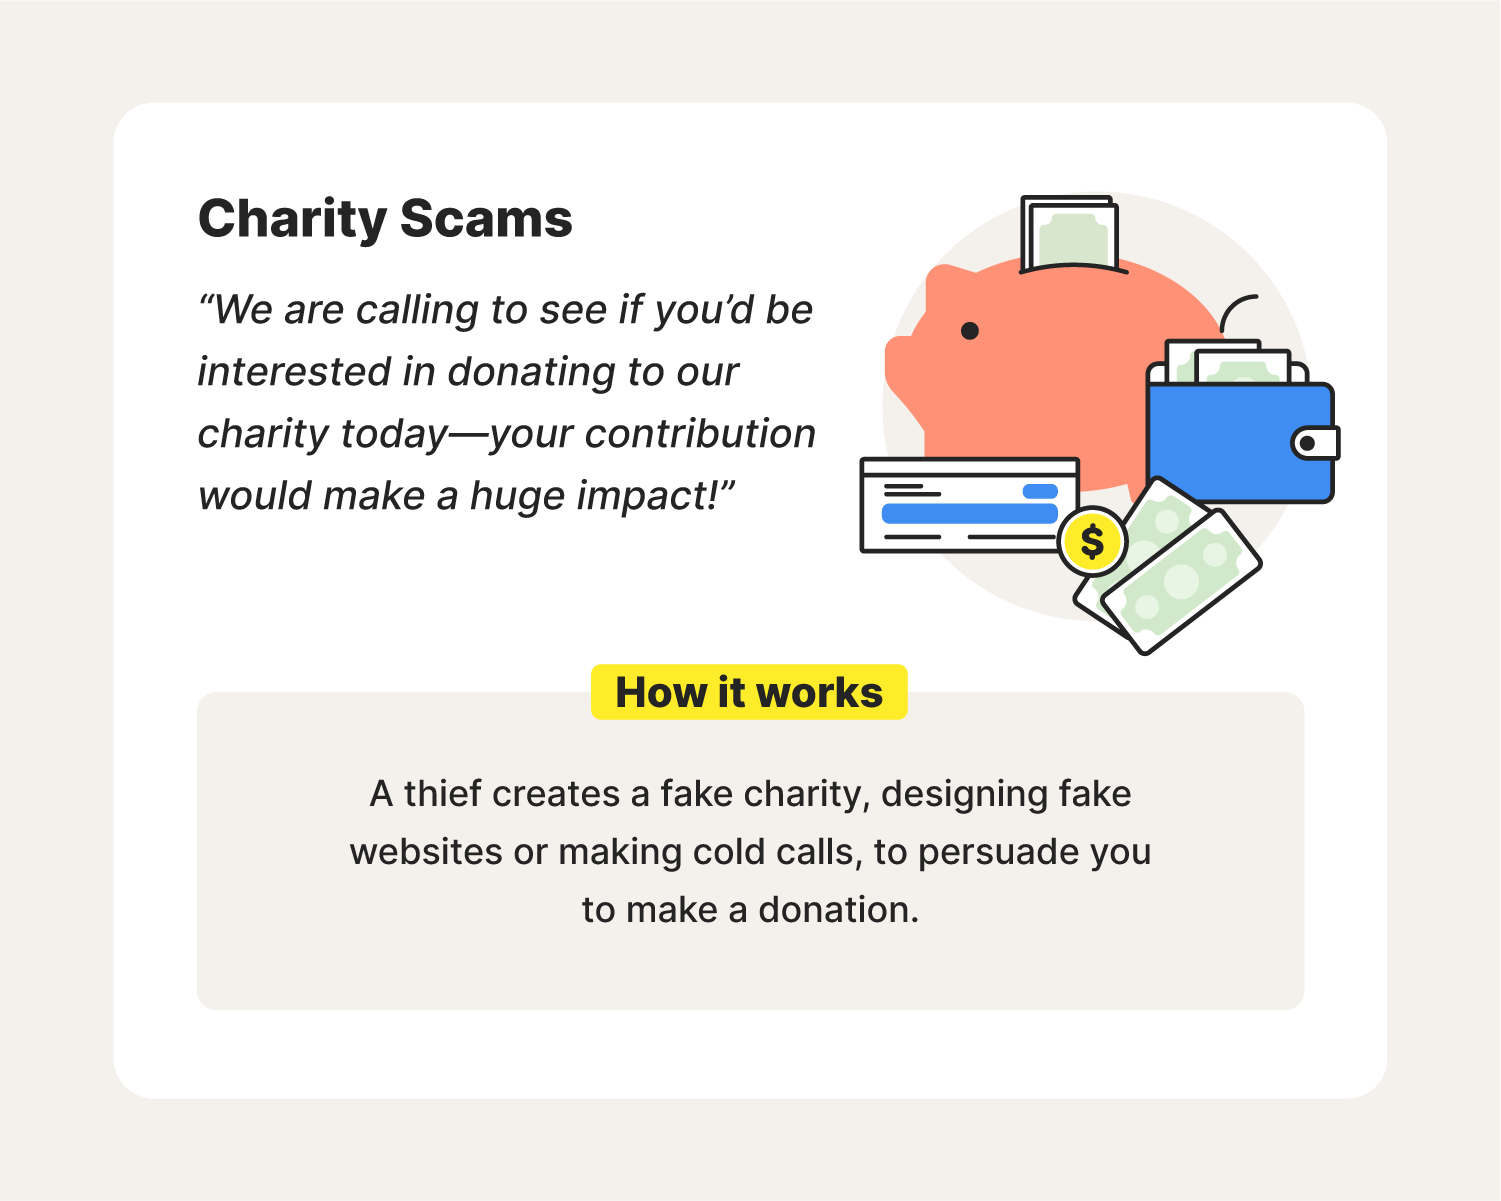 An illustration accompanies an explanation of how a charity scam works in order to show the true dangers of IRS scams.